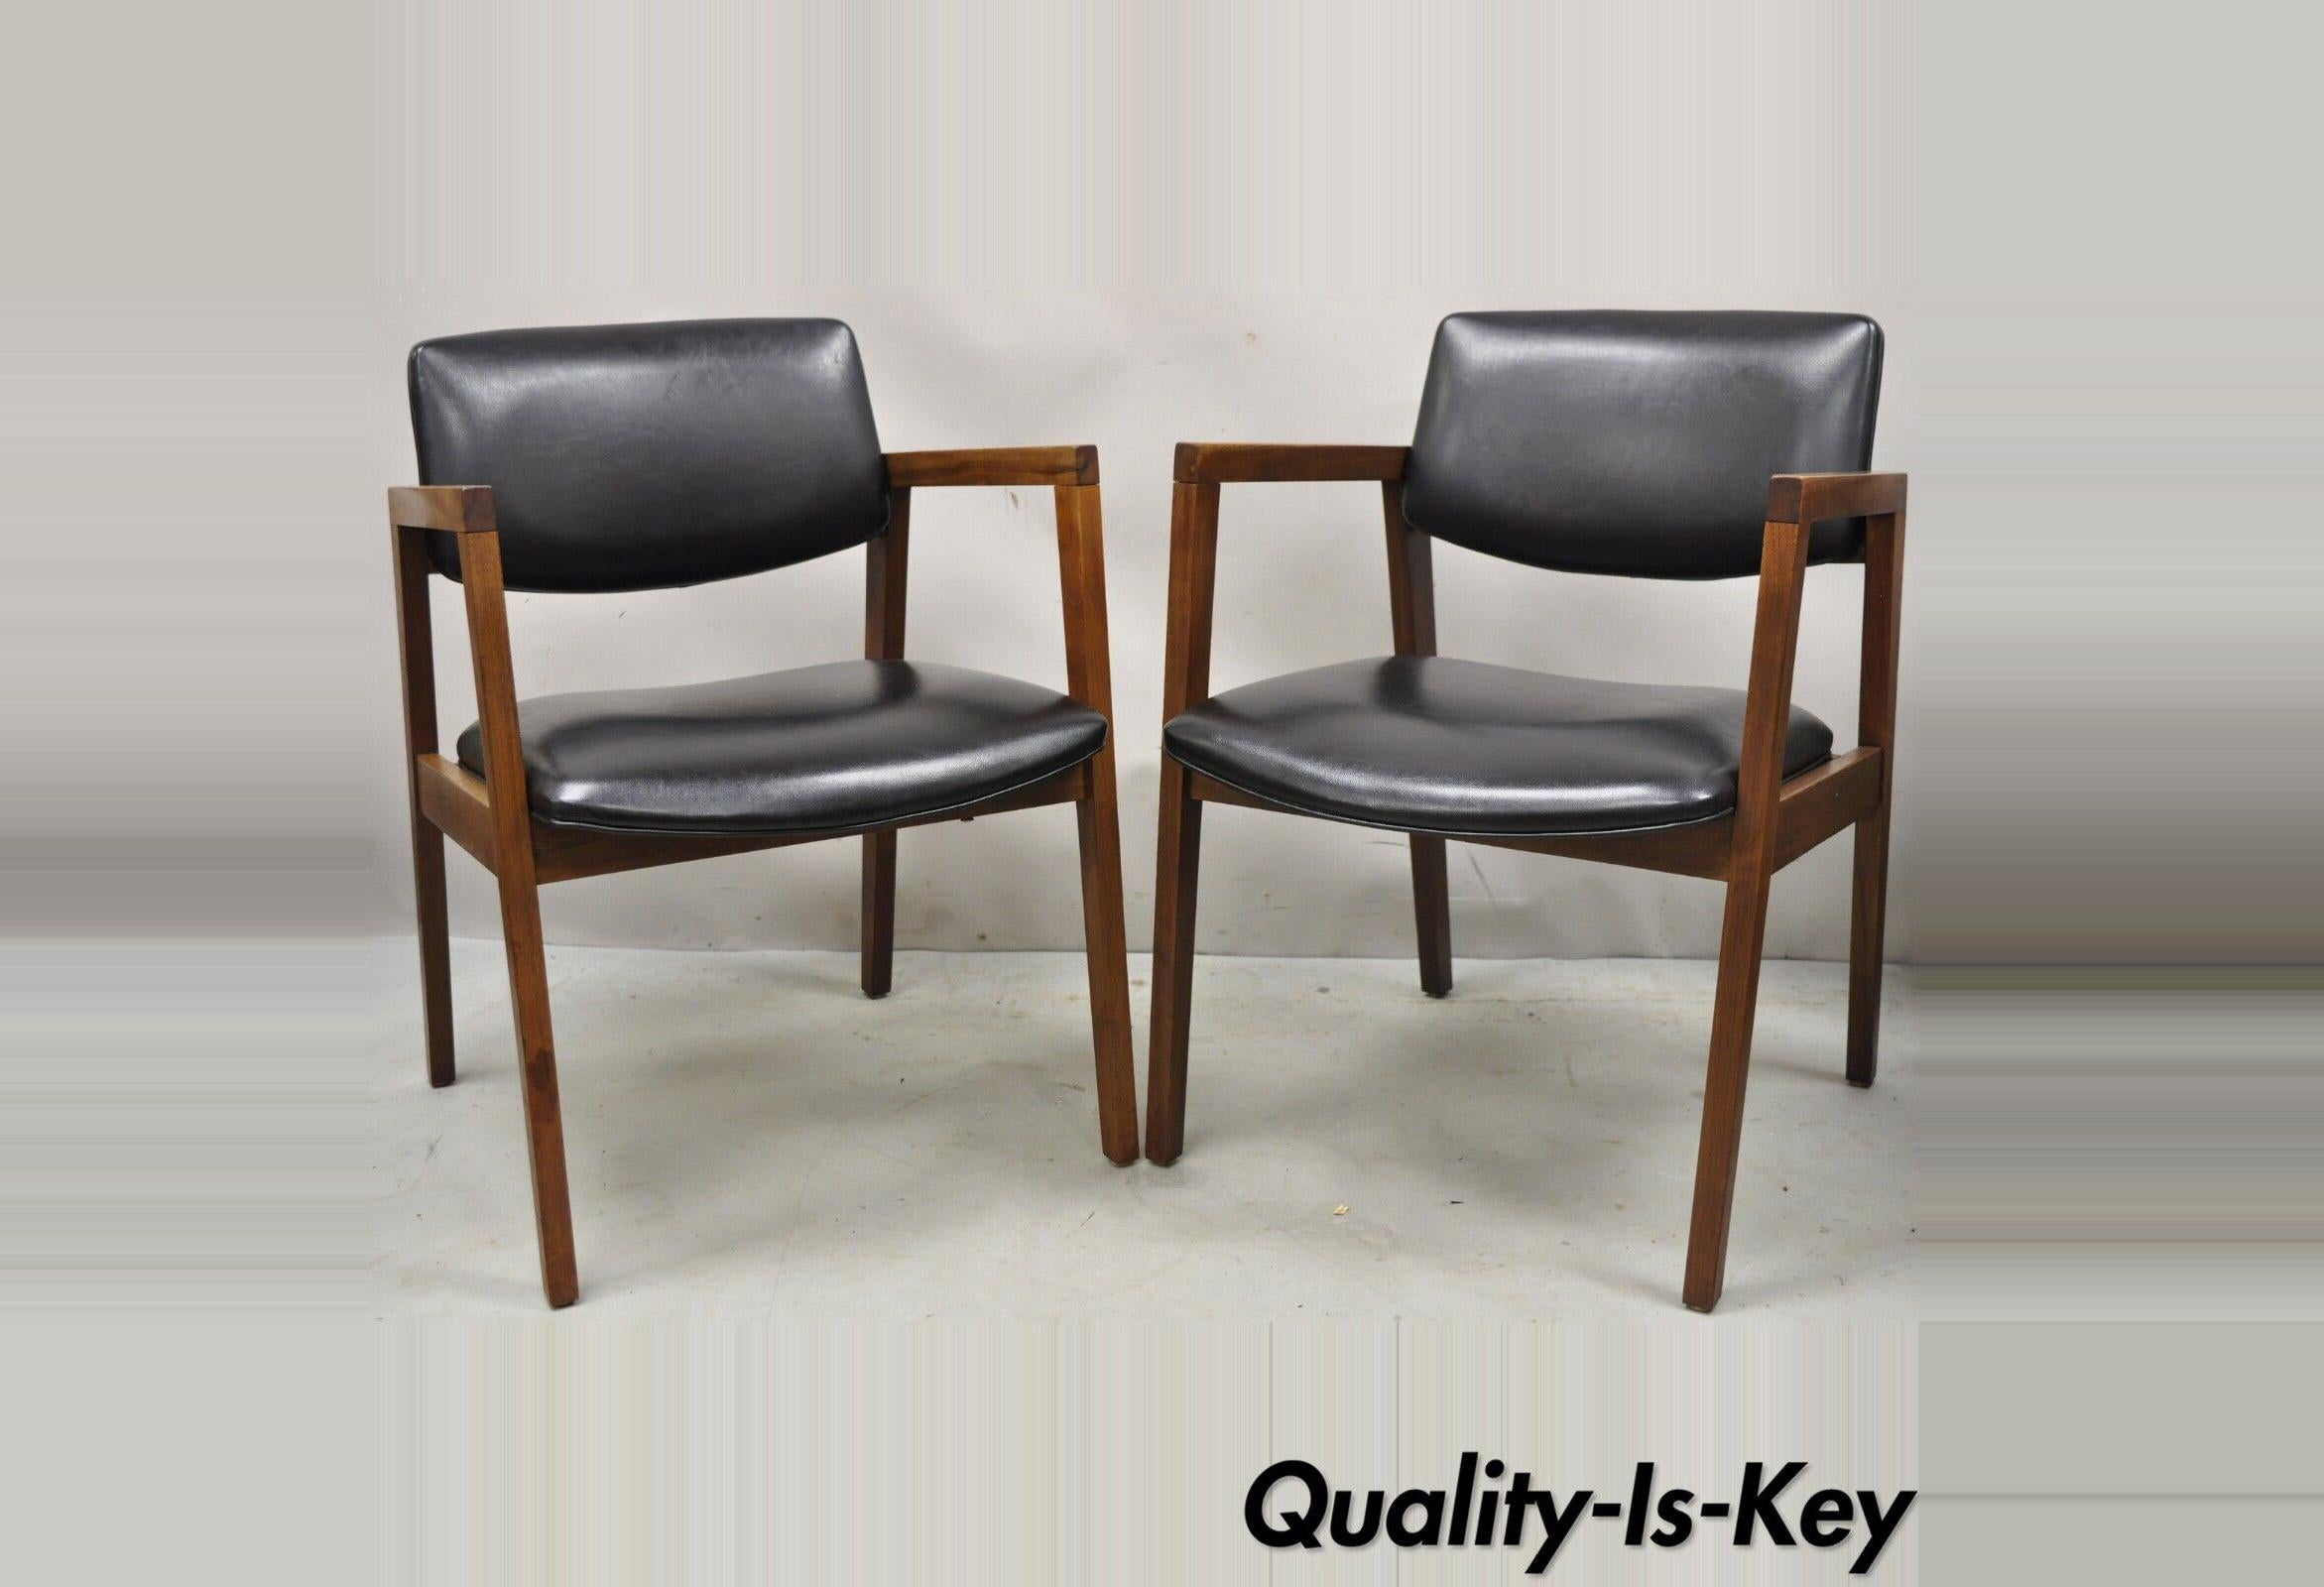 Pair vintage Mid-Century Modern walnut arm chair lounge chair by United Chair Co. Item features black vinyl upholstery, solid wood frames, original labels, clean modernist lines, great style and form. Circa Mid to late 20th Century. Measurements: